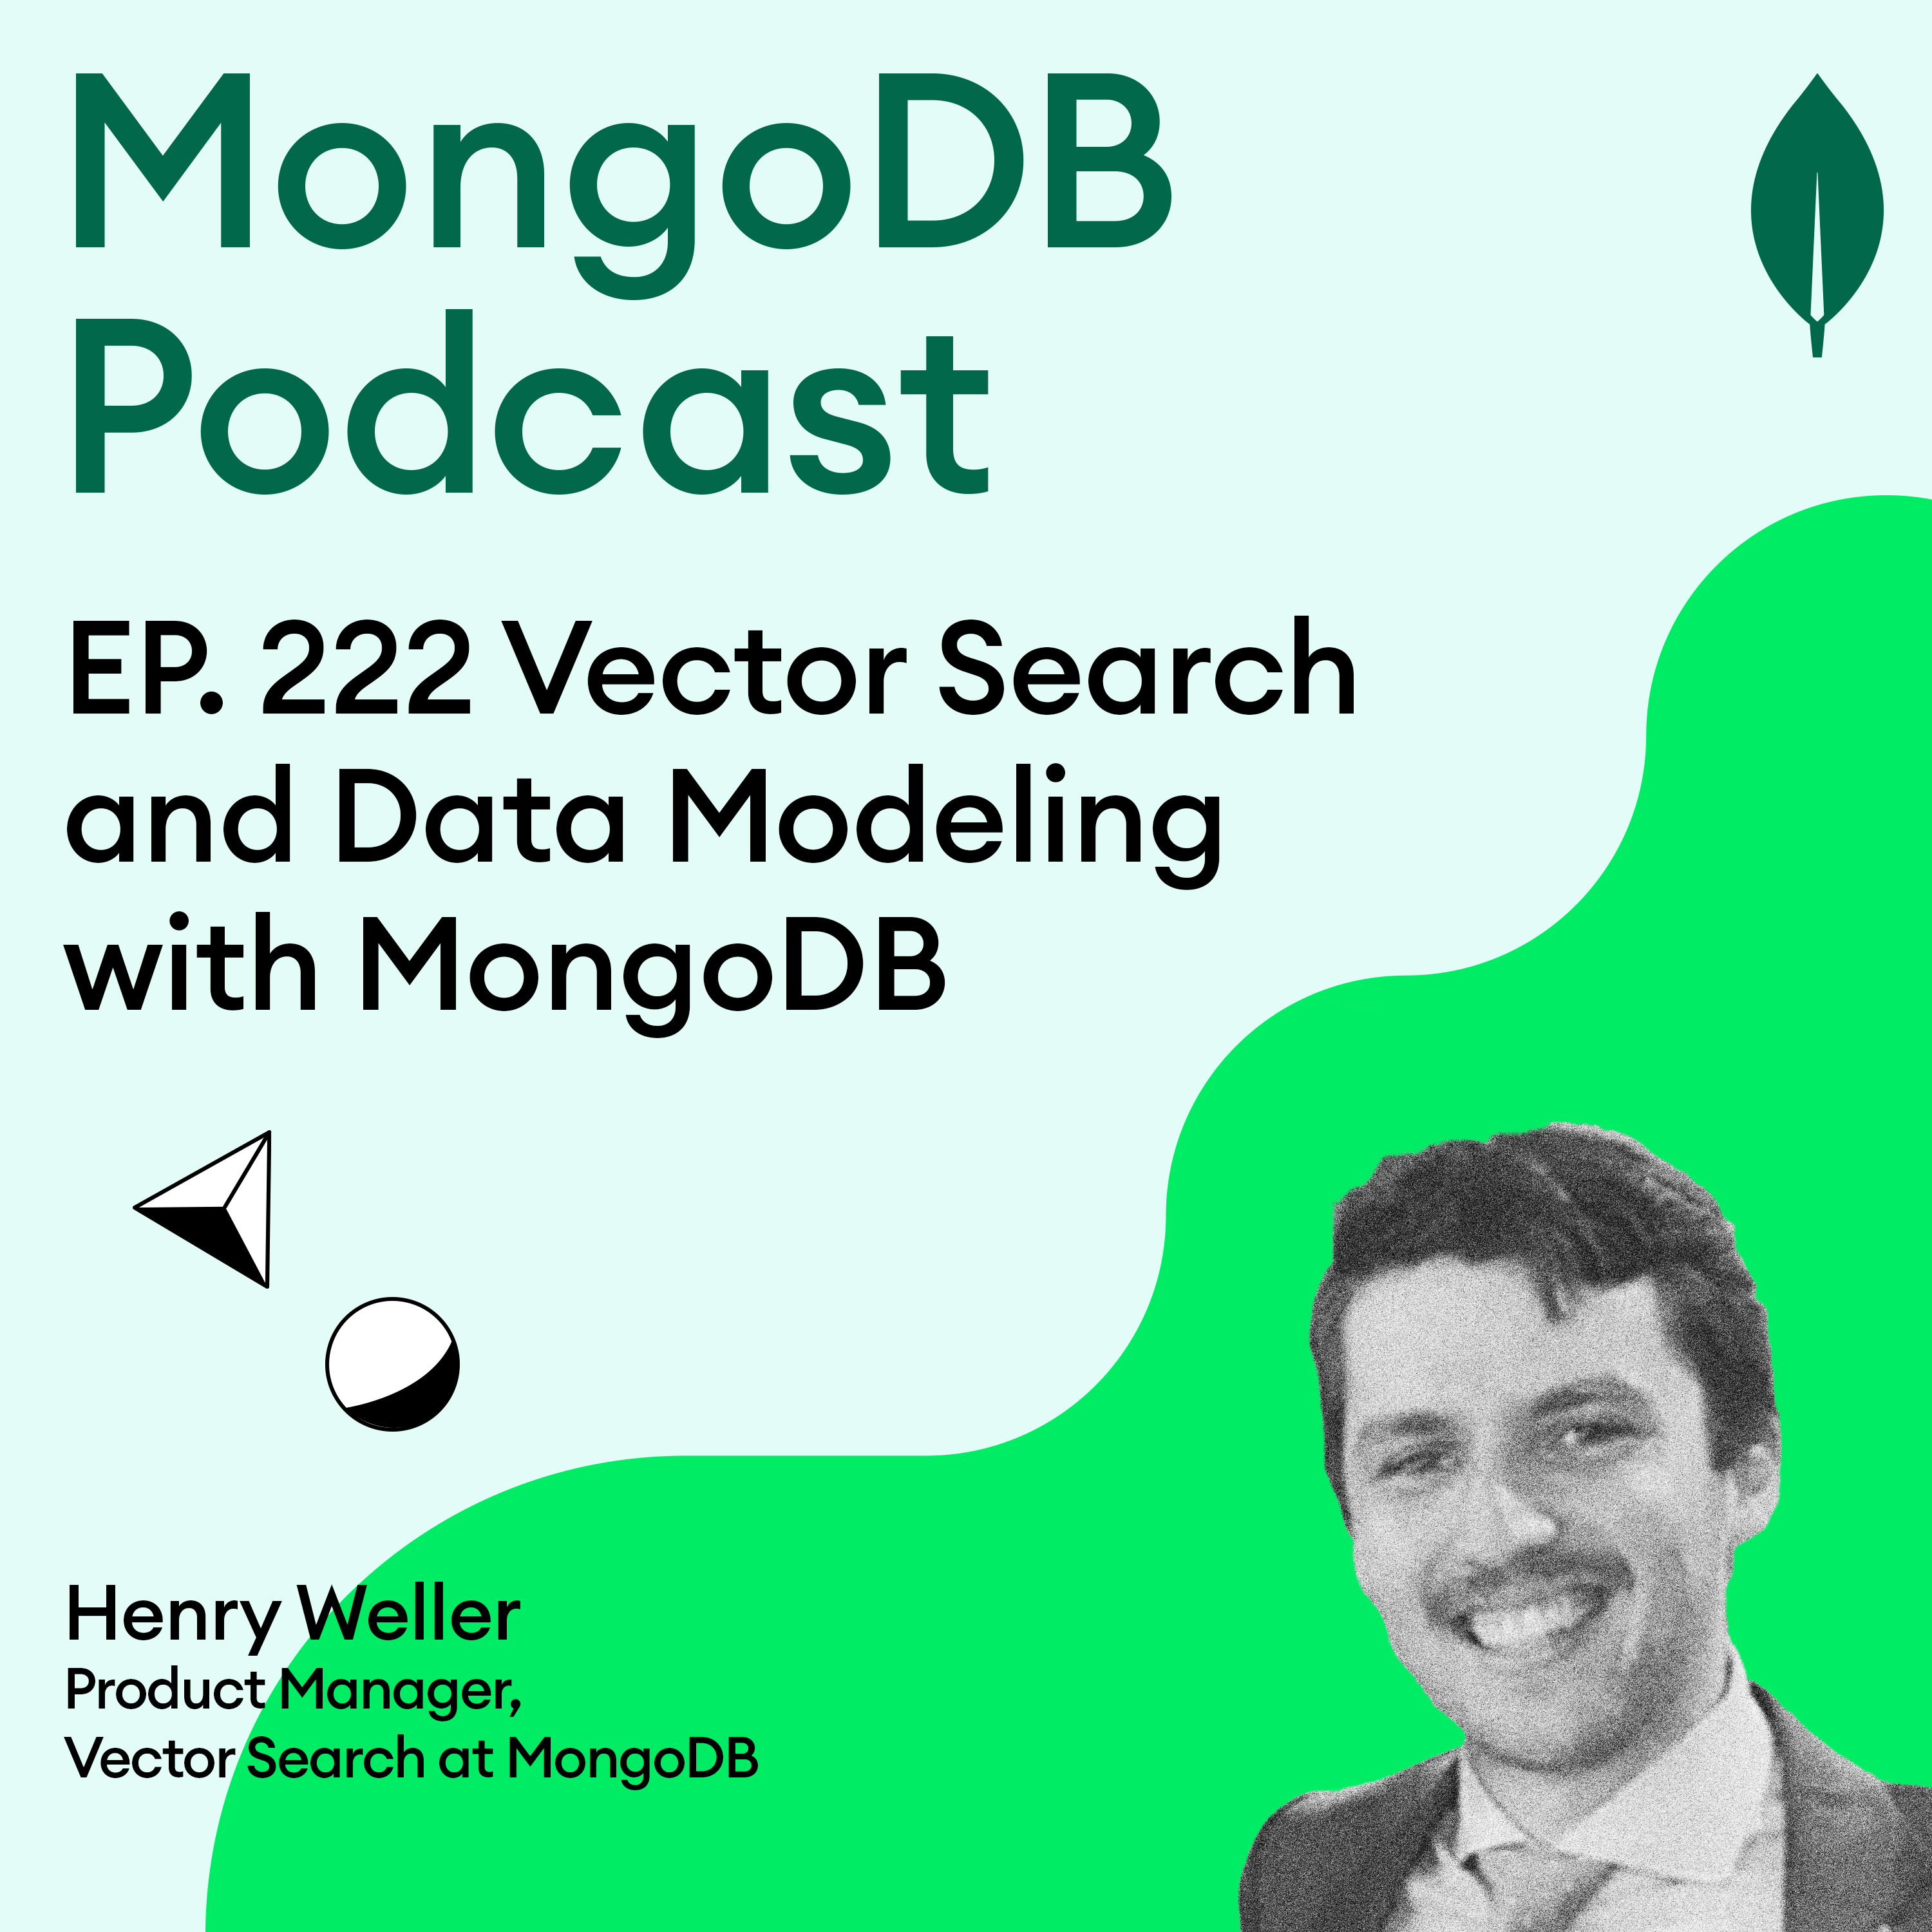 EP. 222 Vector Search and Data Modeling with MongoDB